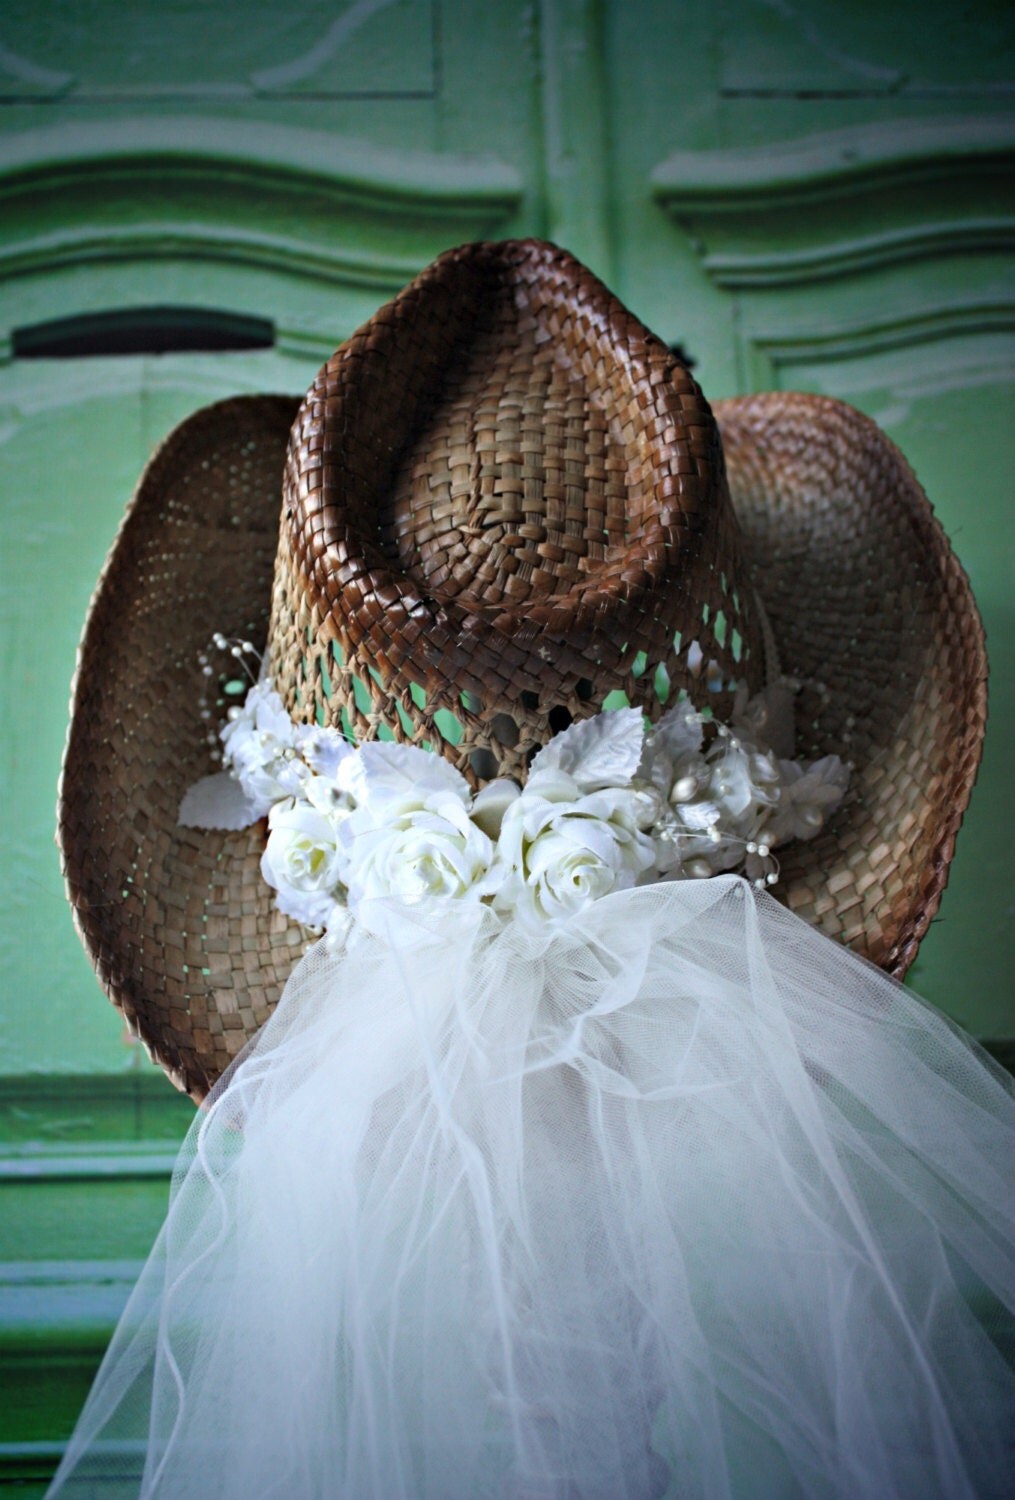 Western-cowgirl-wedding-hat-ivory-white-veil-rustic-bride-coun